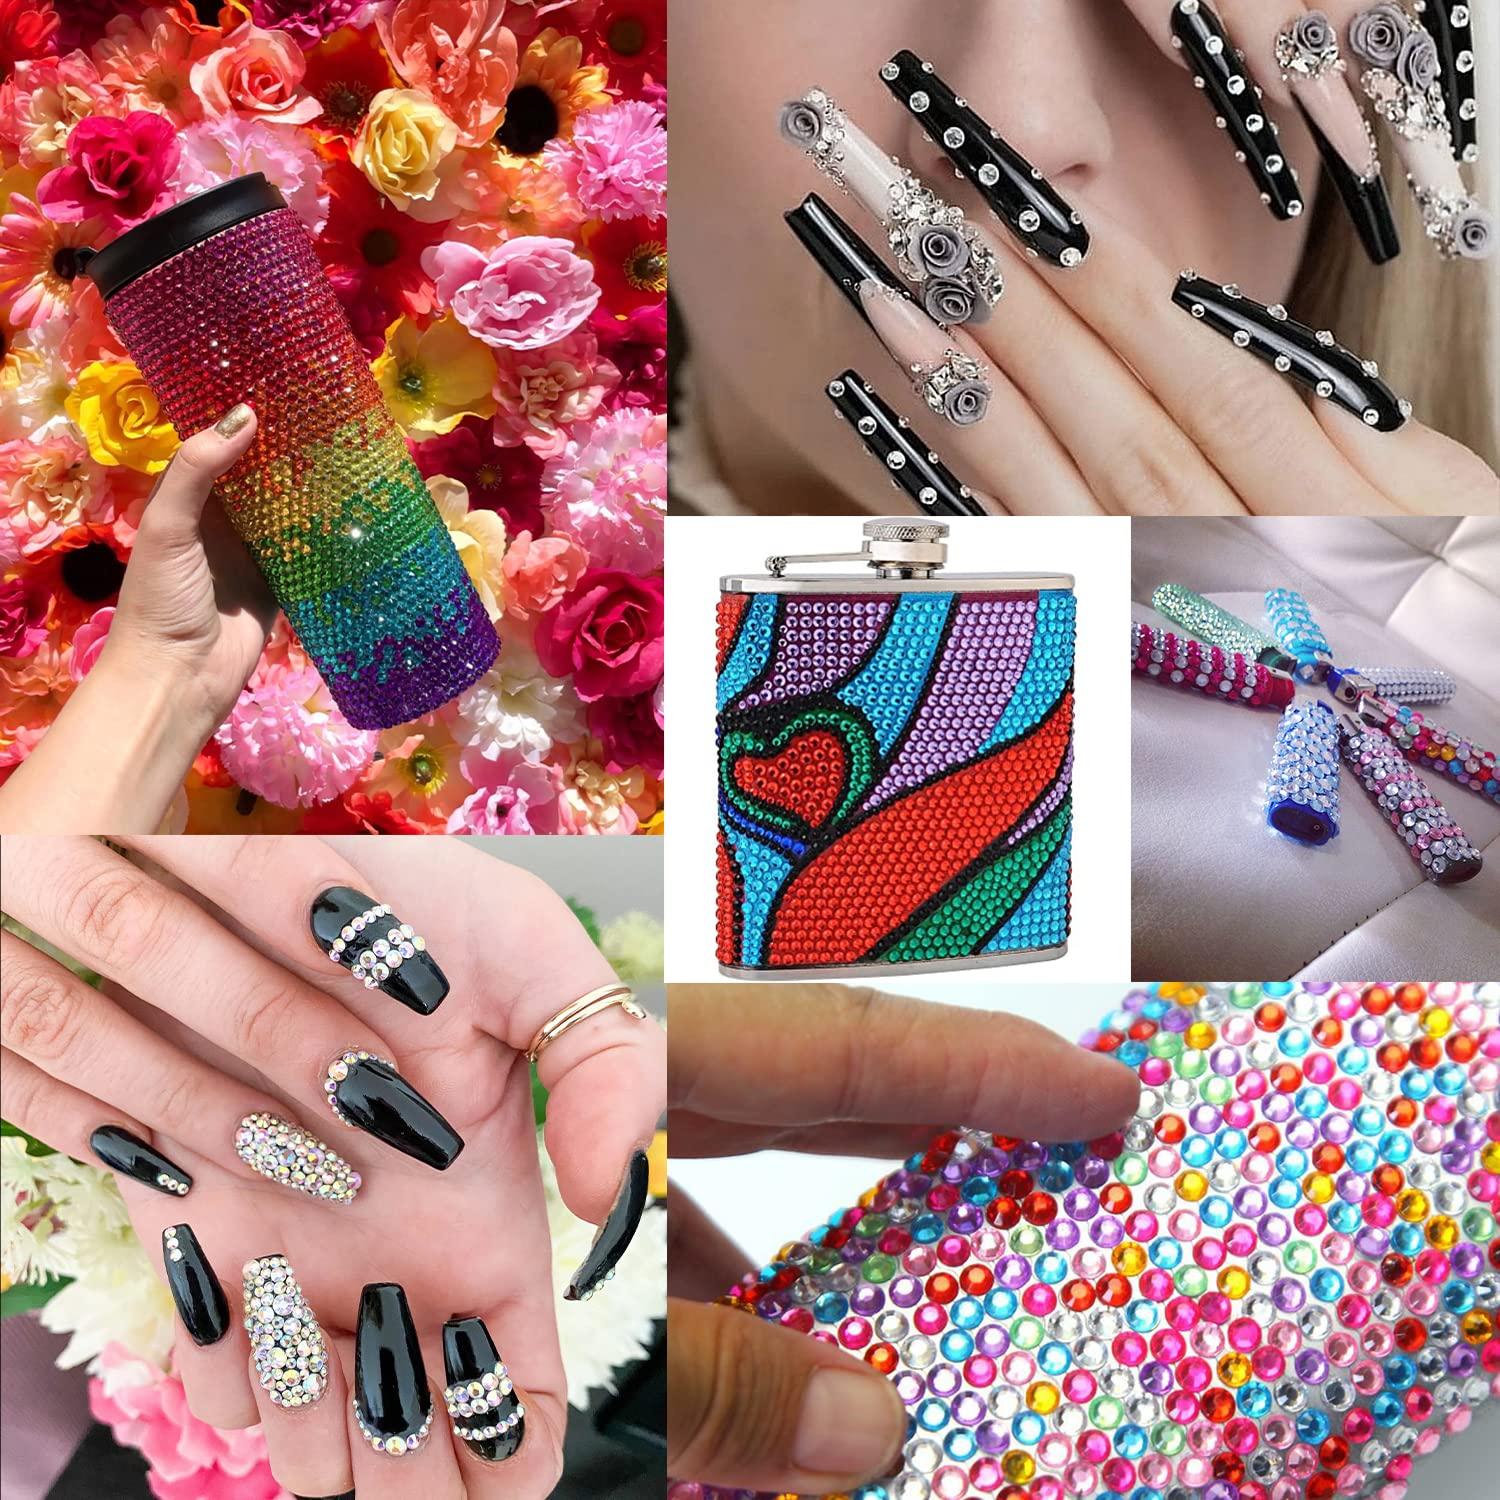 Flat Back Rhinestone Kits Colorful Rhinestones+Crystal AB&Transparent White  Gems With Quick Dry Makeup Glue+Picker Pencil+Tweezer For Nail Art And Face  Make-up 01-colorful+AB+clear+glue